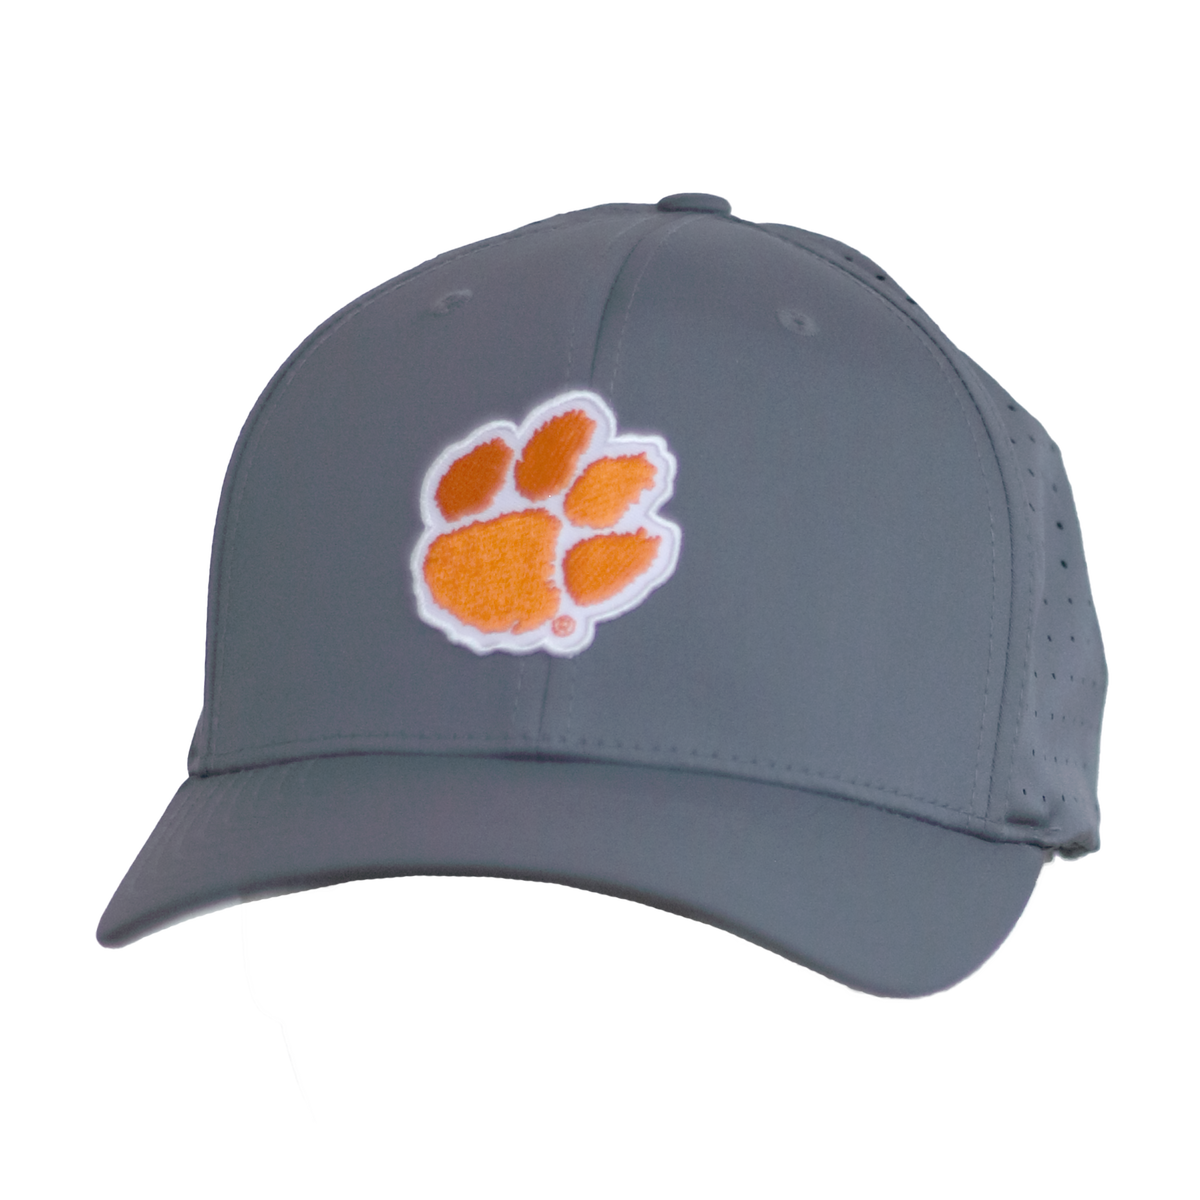 Clemson Orange and White Tiger Paw R632 - Charcoal